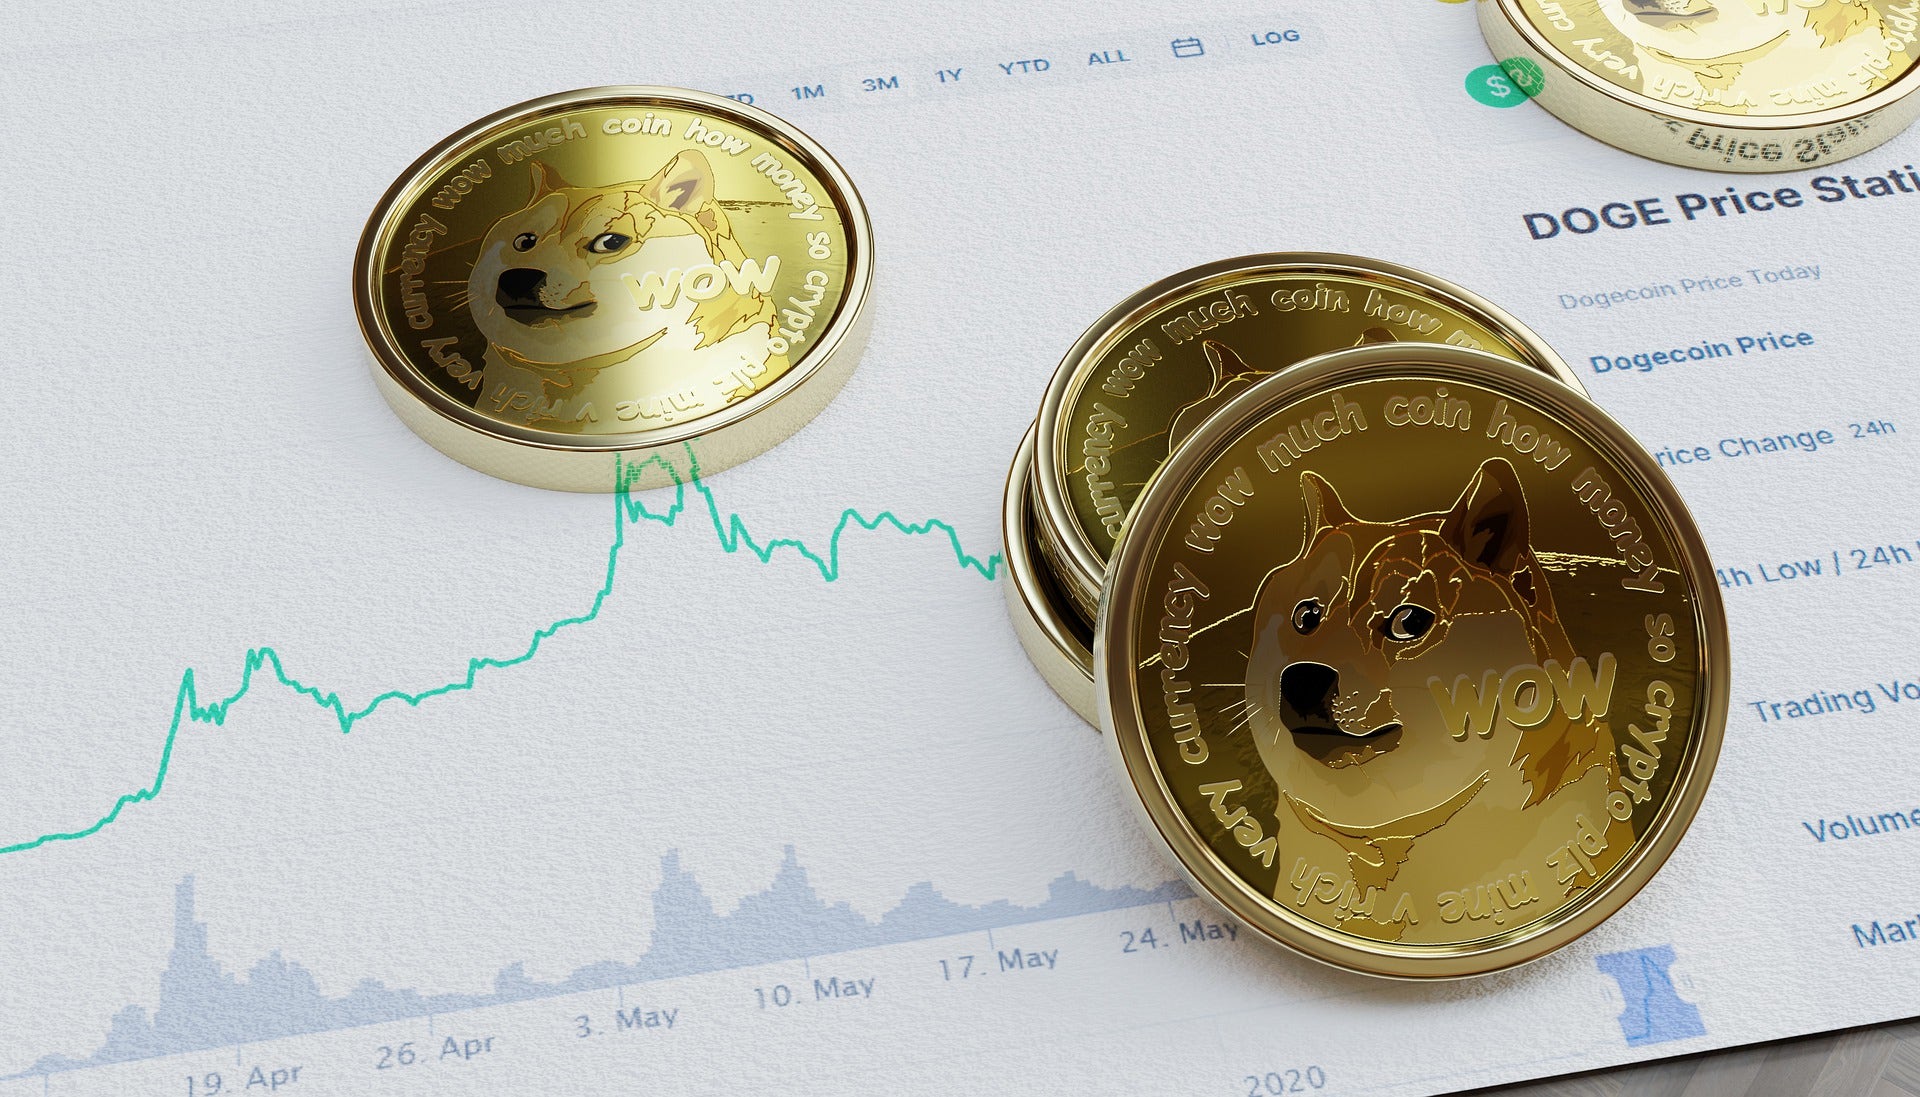 Dogecoin Perks Its Ears Up! Does The Crypto Hear A Bullish Stampede On The Way?